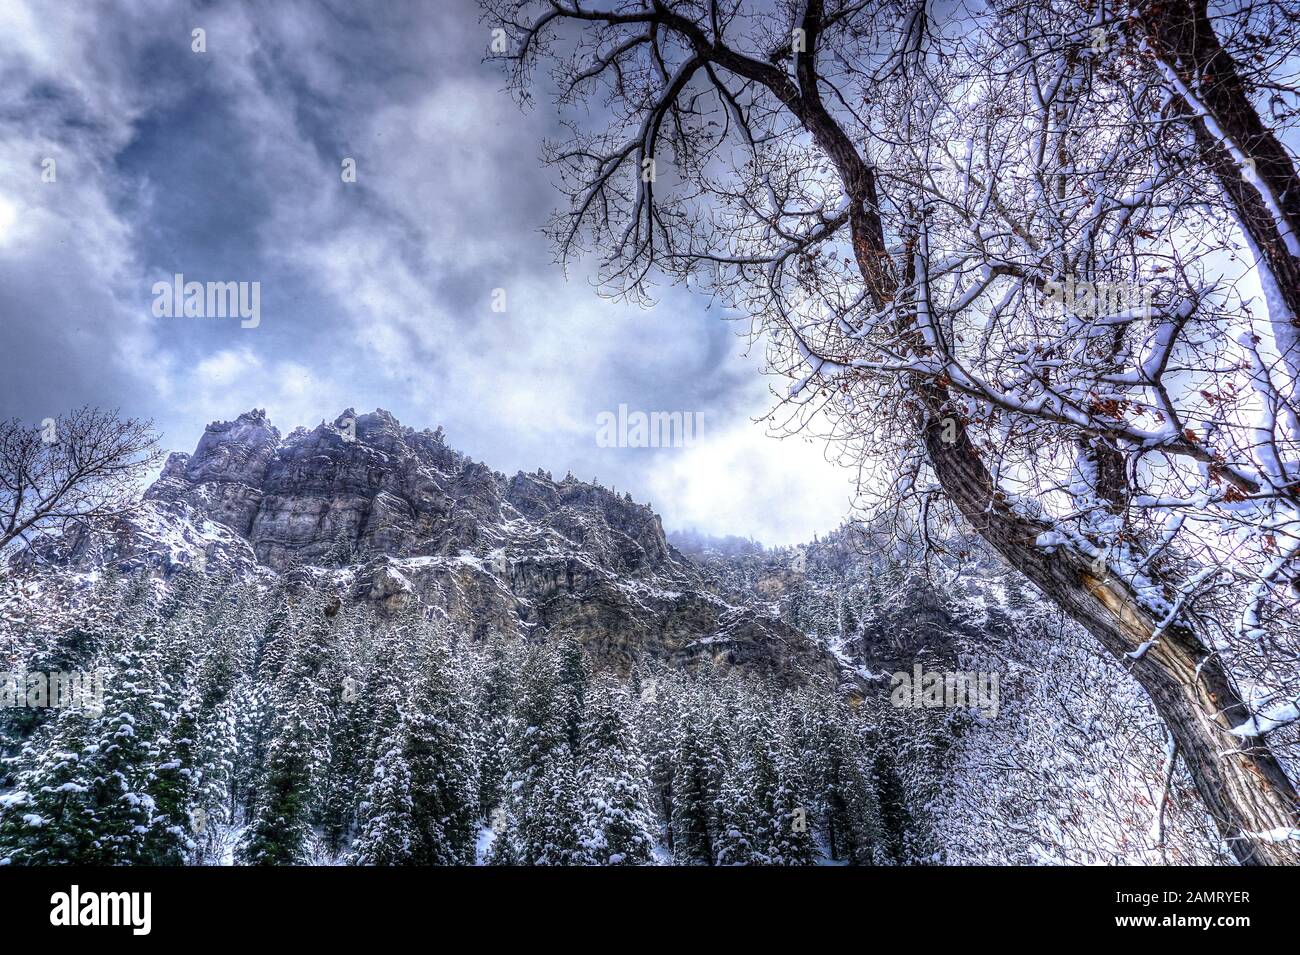 High altitude clouds swirl around the rugged peaks and snow dusted forests of the Wasatch Mountains in Utah. Stock Photo